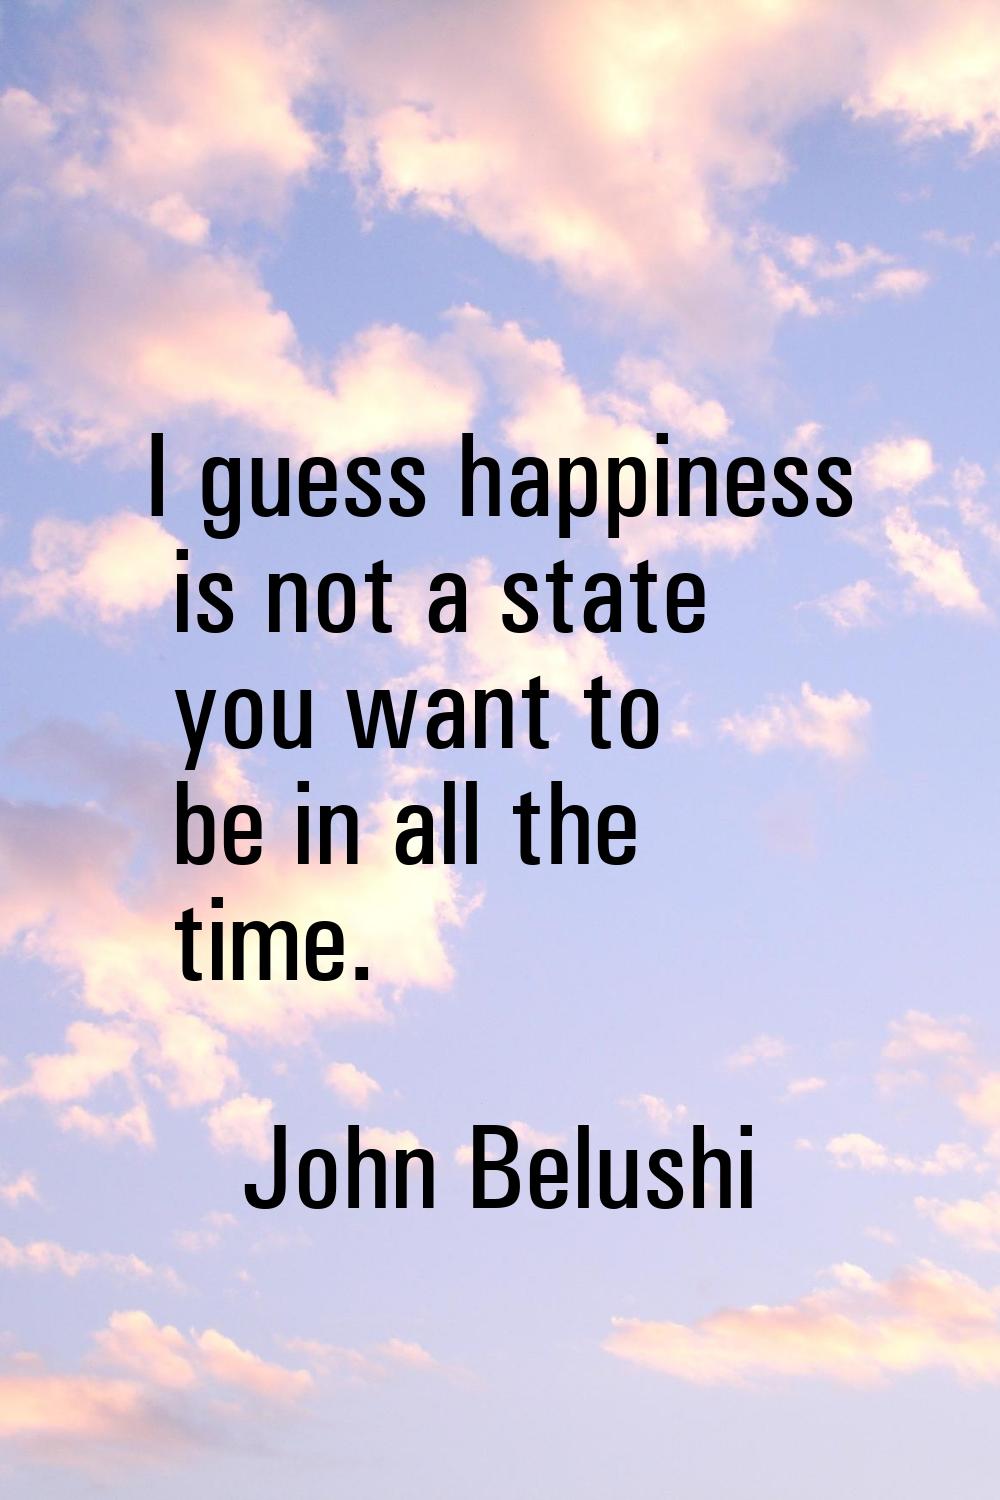 I guess happiness is not a state you want to be in all the time.